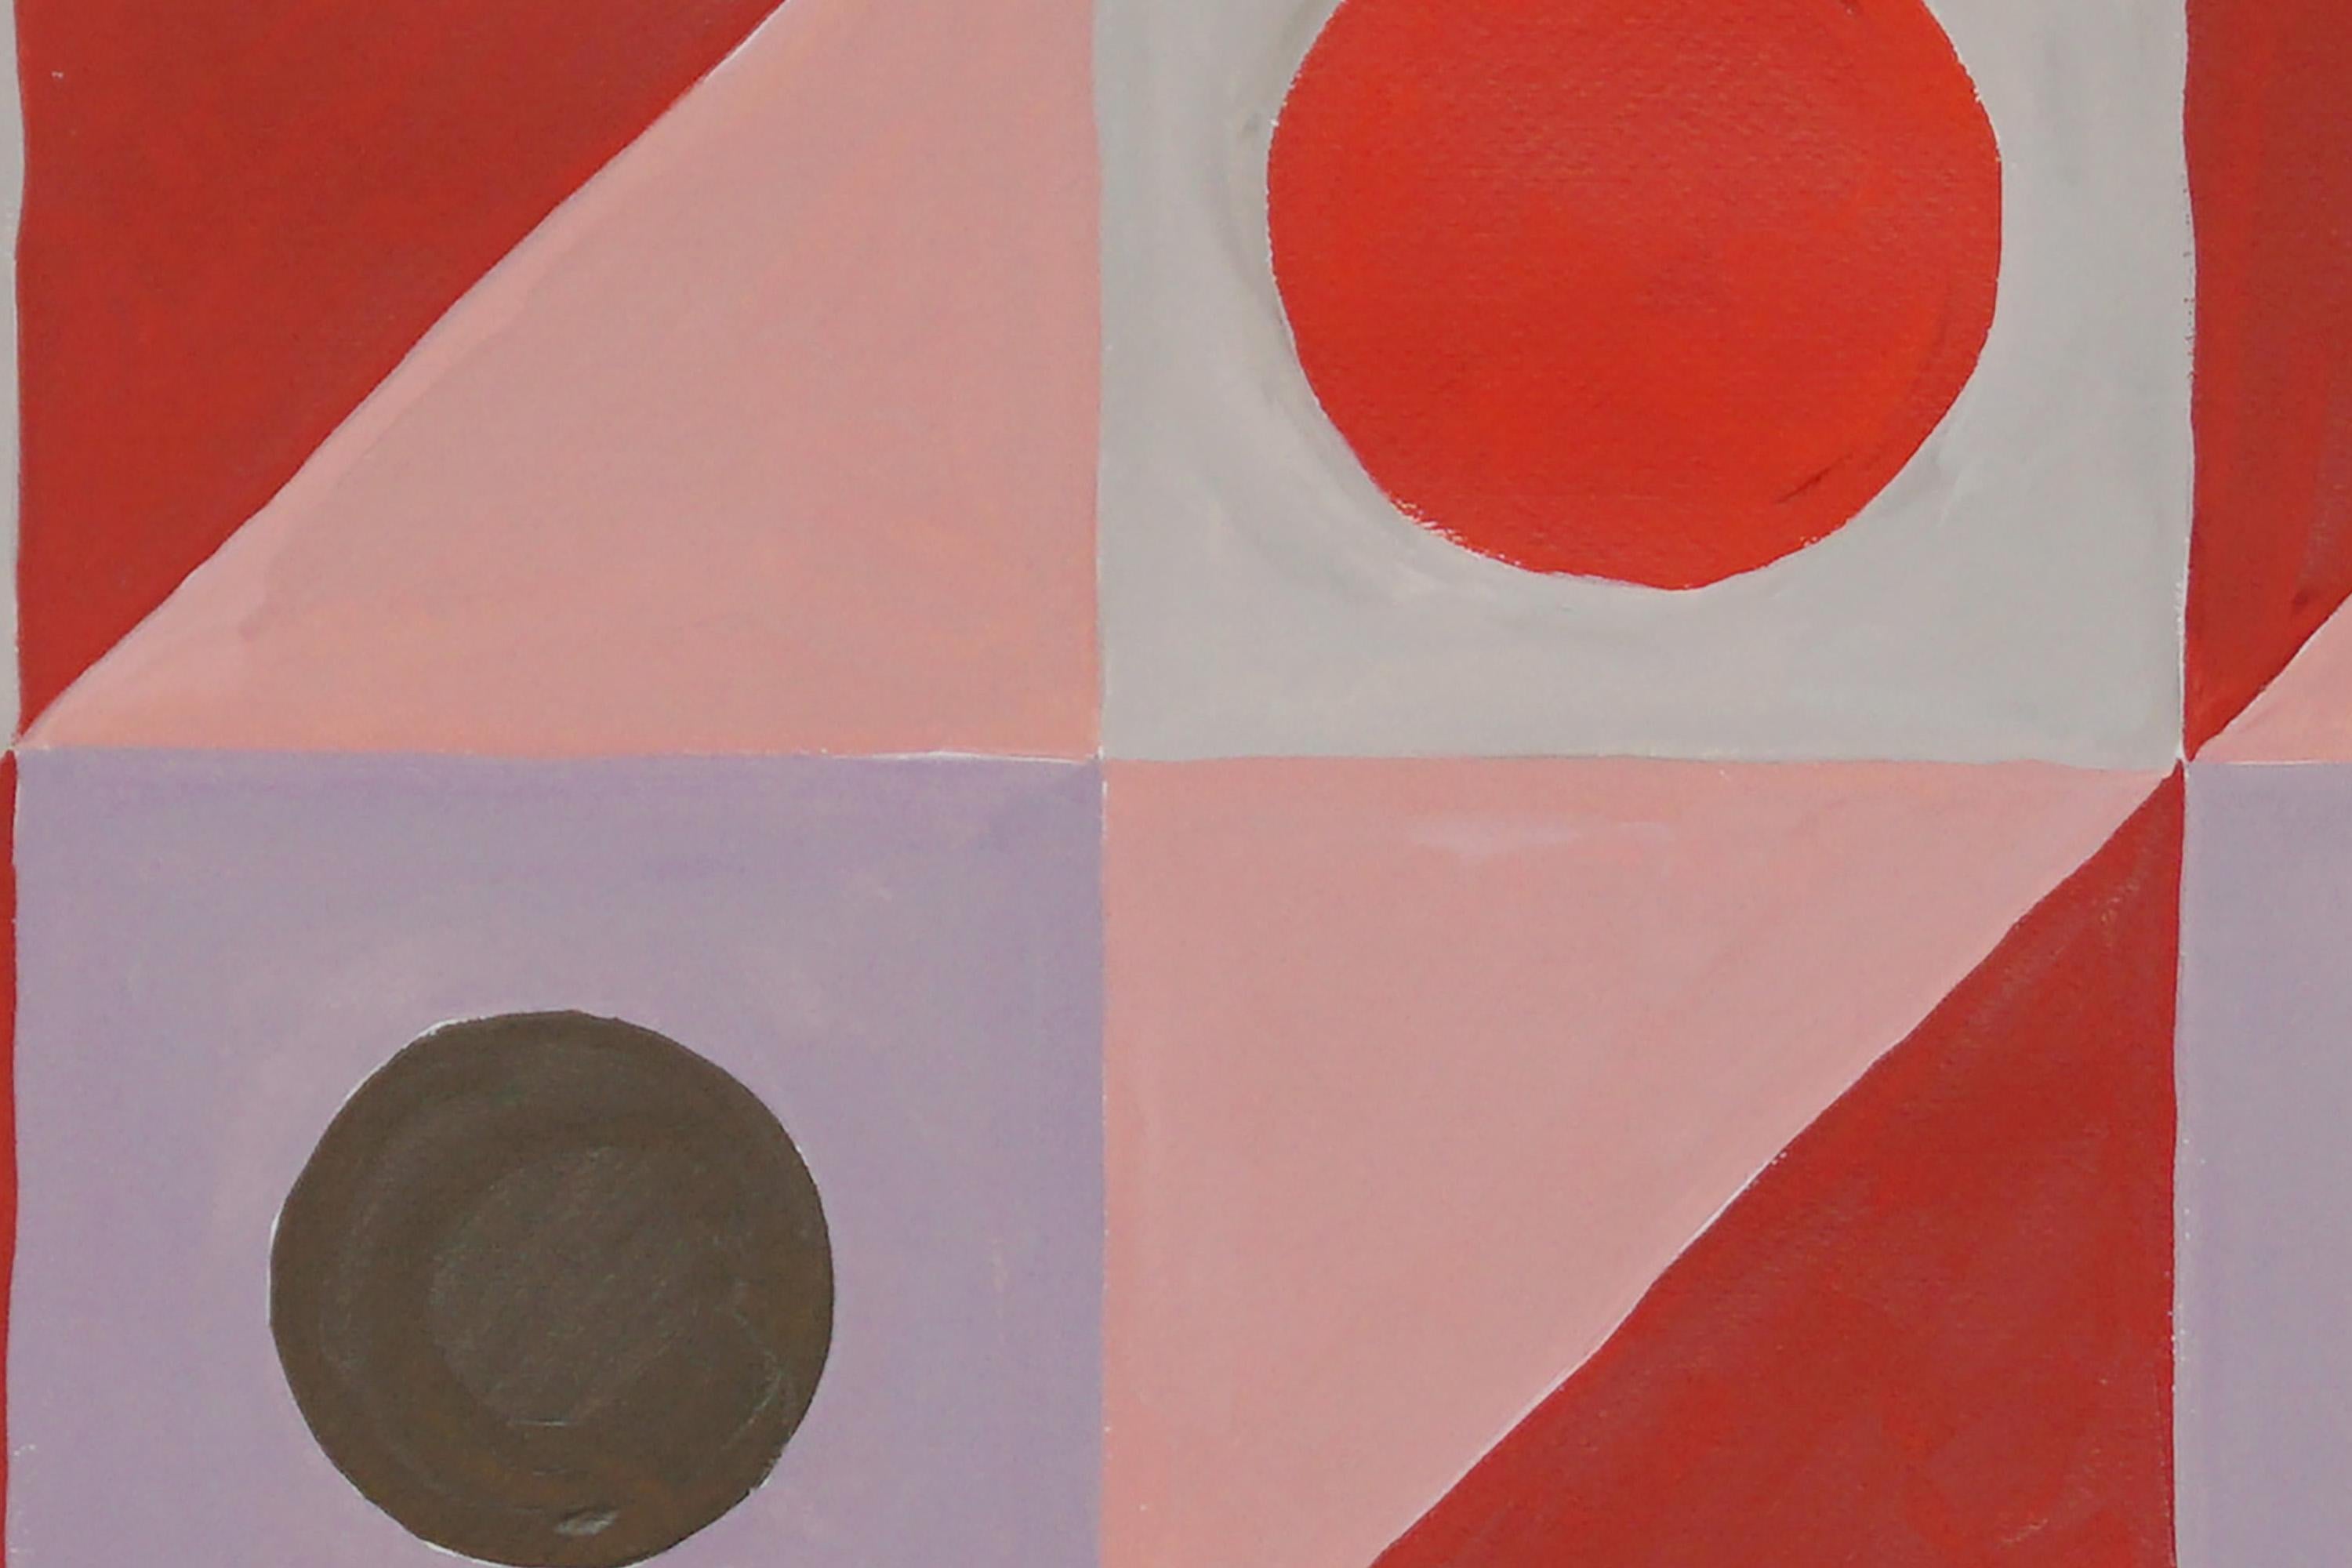 Late Spring Poppy Flower, Geometric Grid, Modernist Tiles, Red and Pink Circles - Bauhaus Painting by Natalia Roman